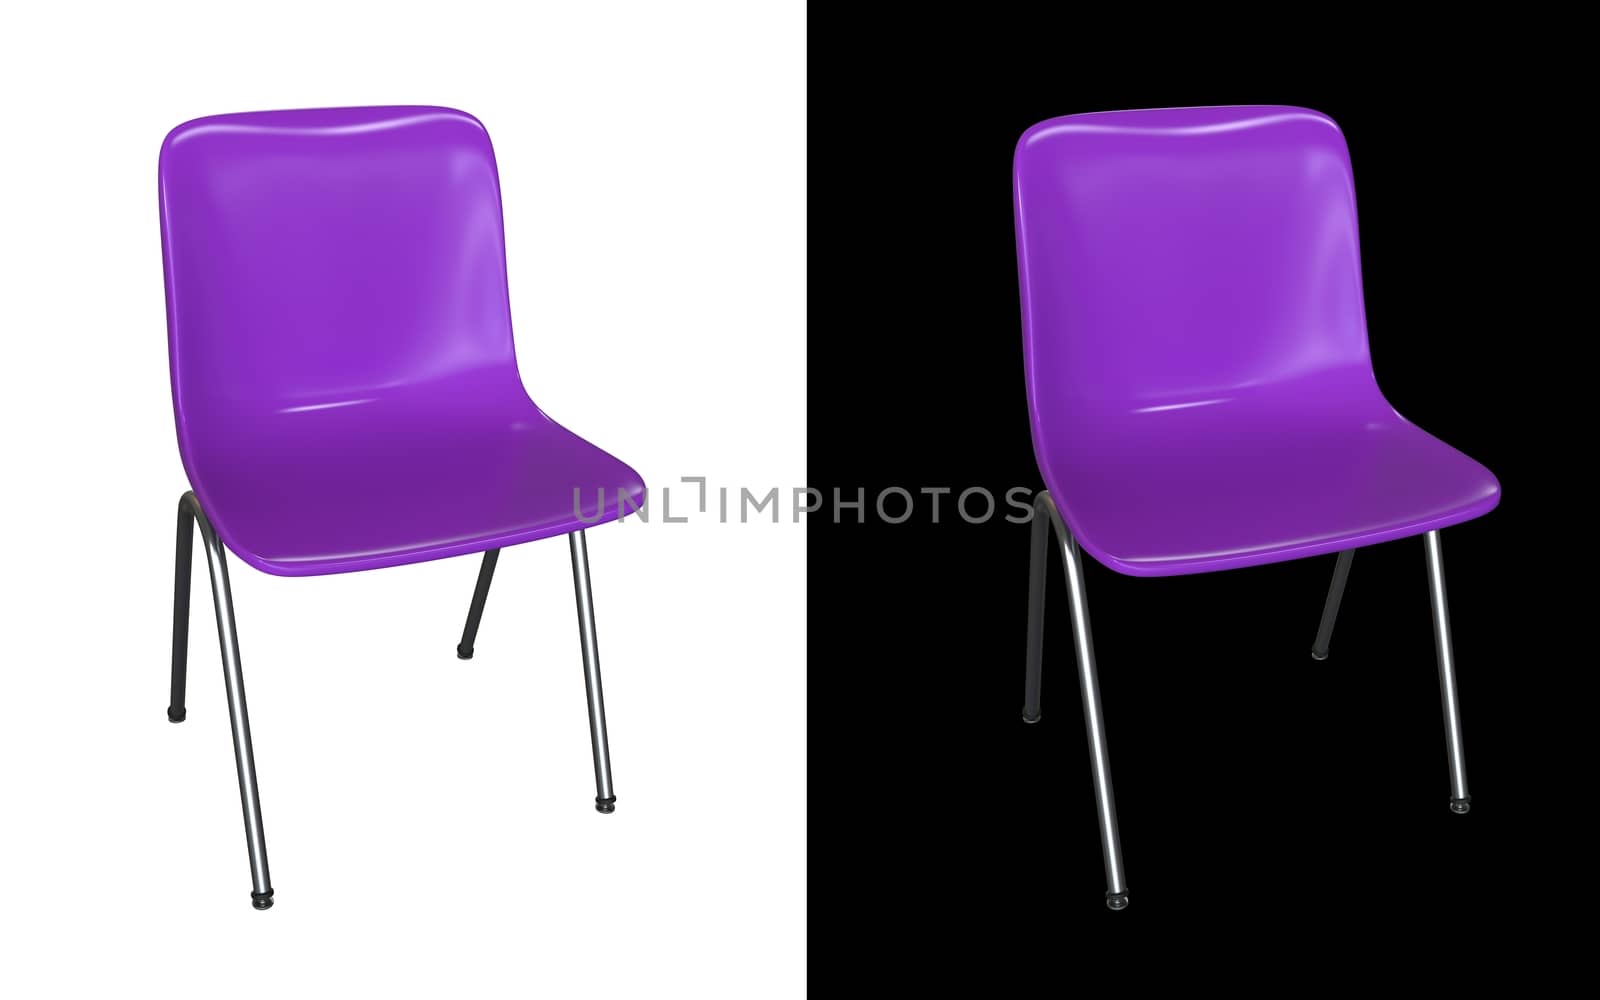 Violet modern 3d render chair isolated on black and white background. by ingalinder